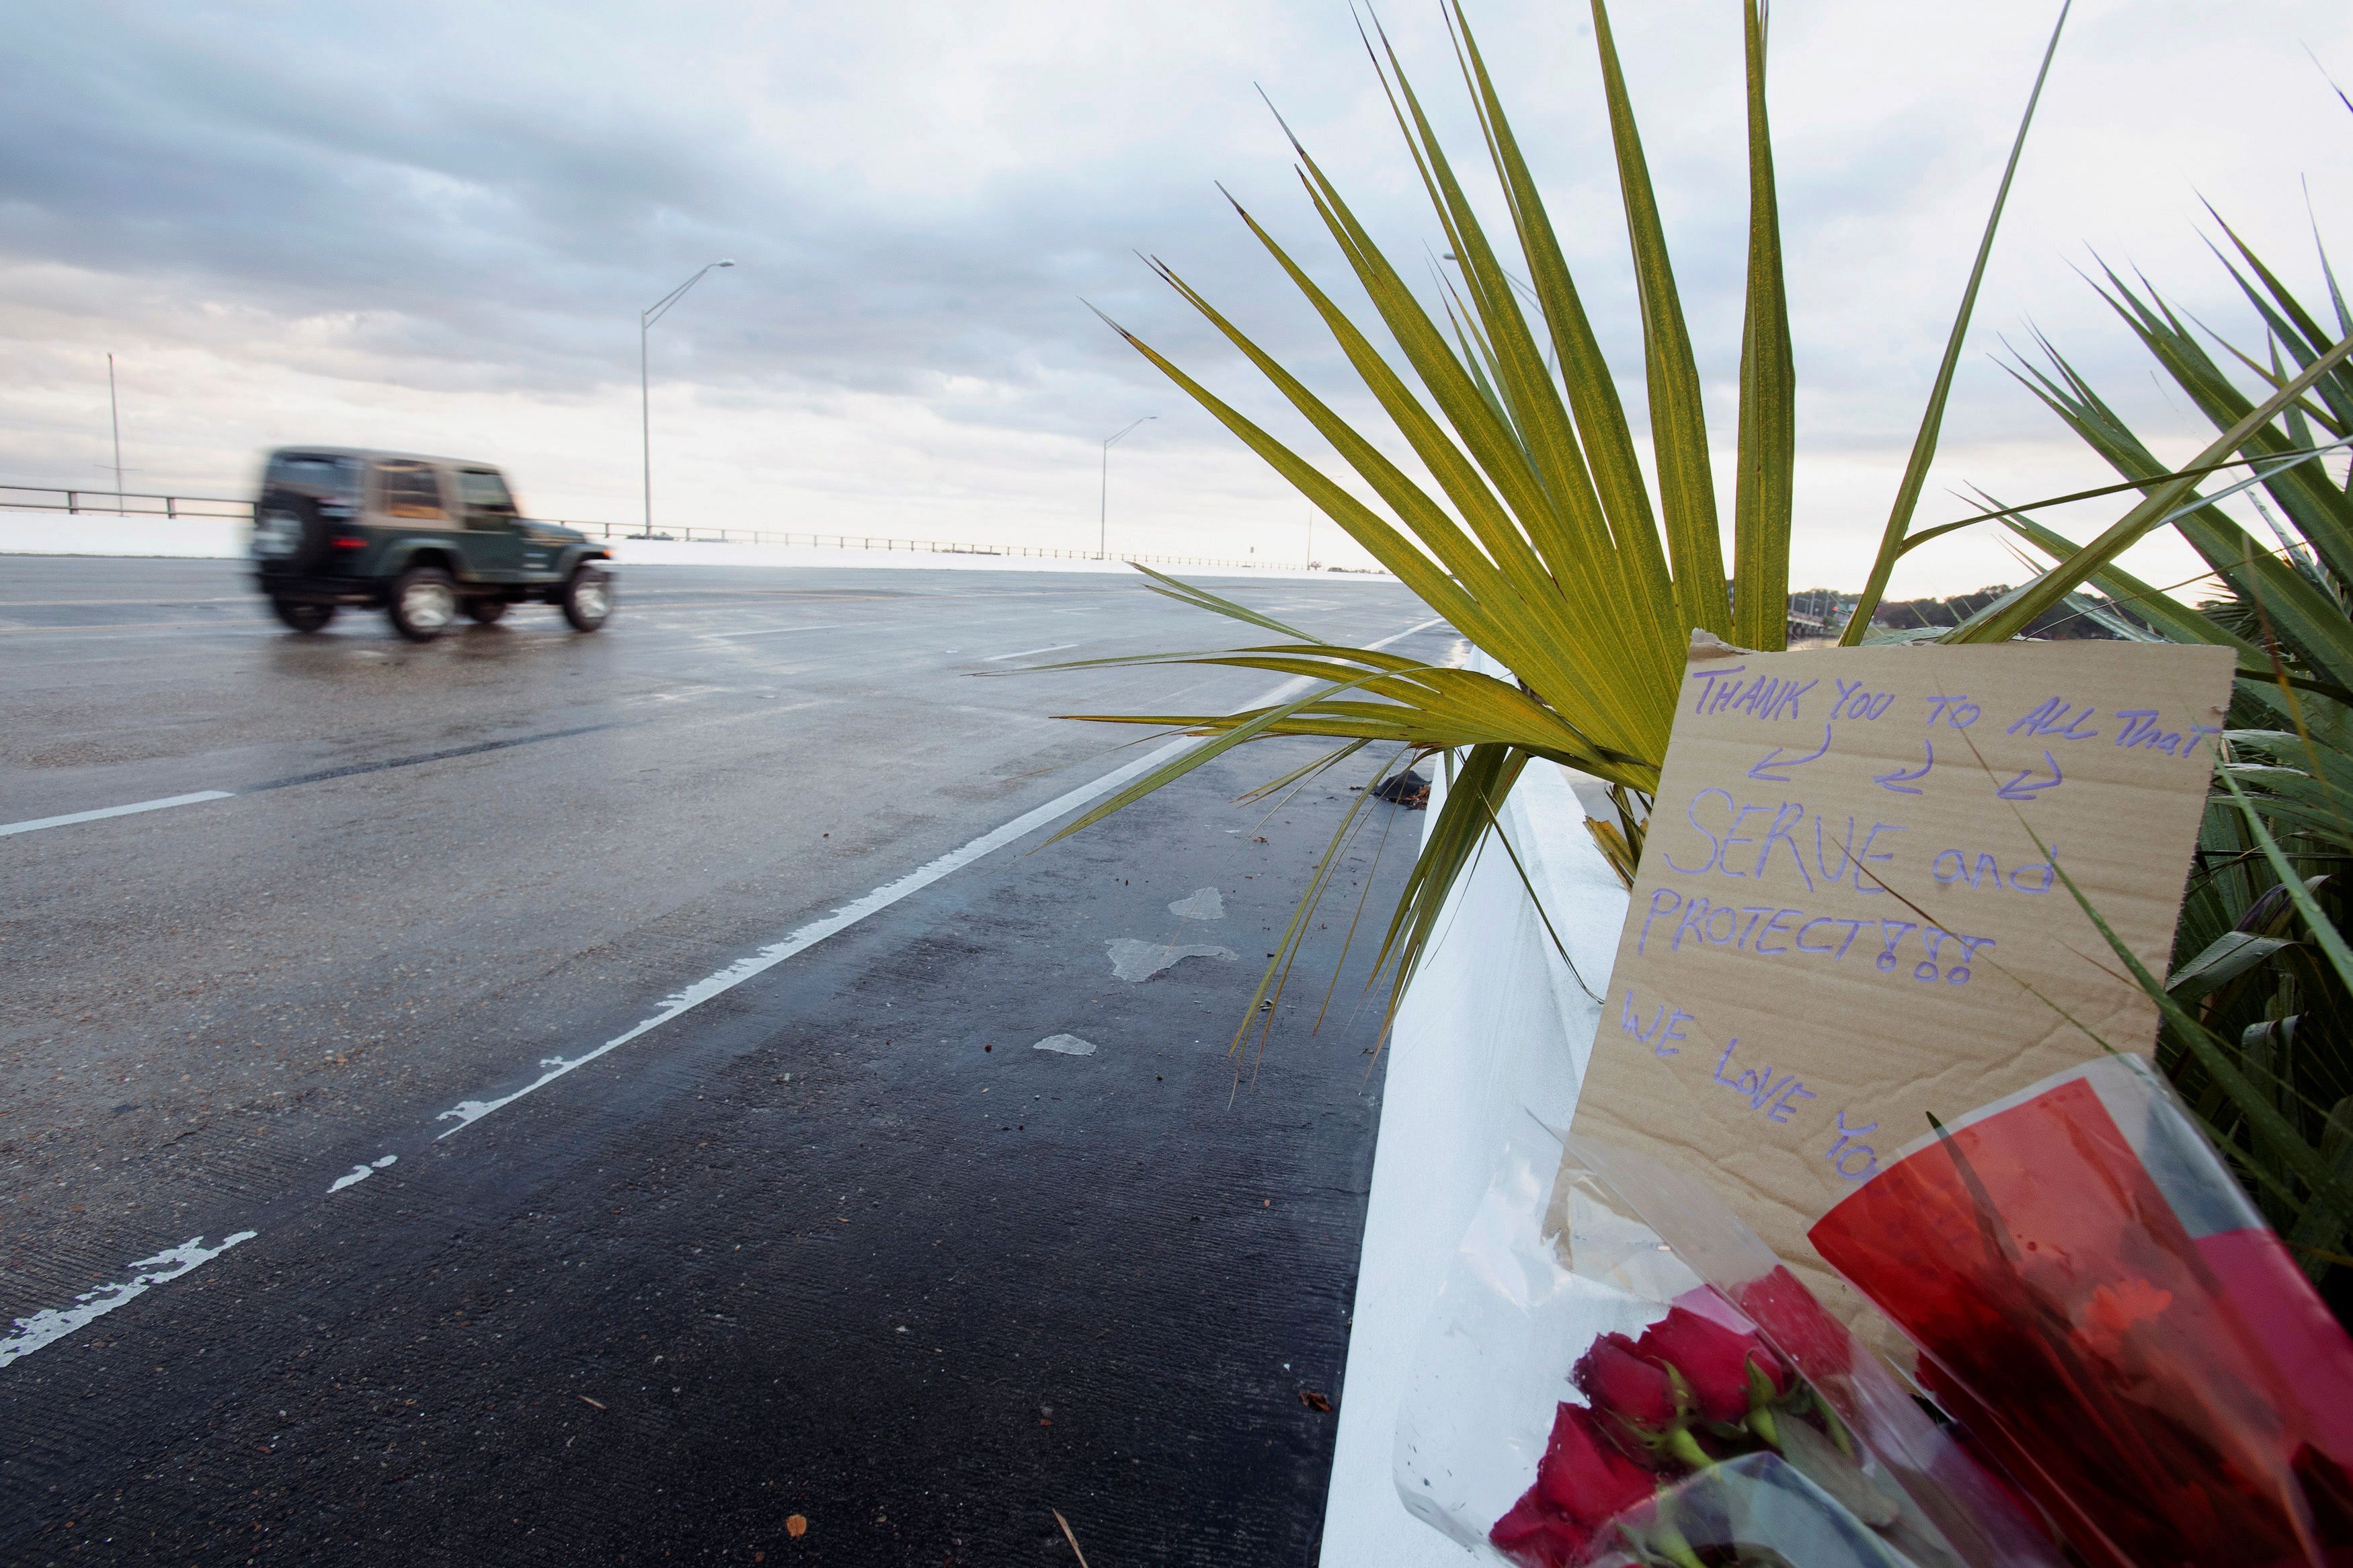 Flowers and a message are left on the entrance bridge after a member of the Saudi Air Force visiting the United States for military training was the suspect in a shooting at Naval Air Station Pensacola, in Pensacola. (Reuters Photo)